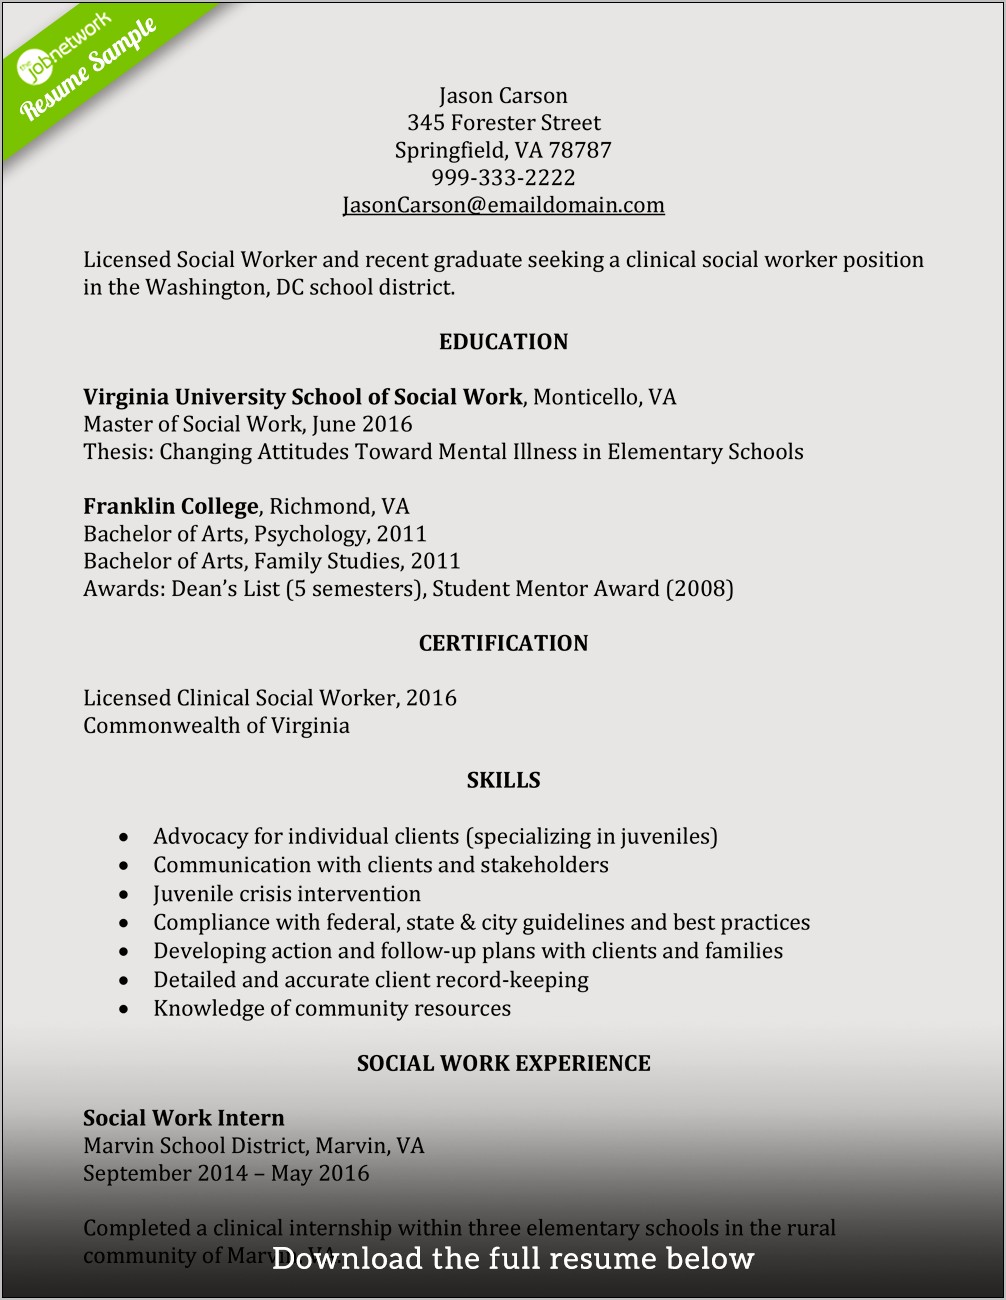 Simple Resume Format For Social Worker